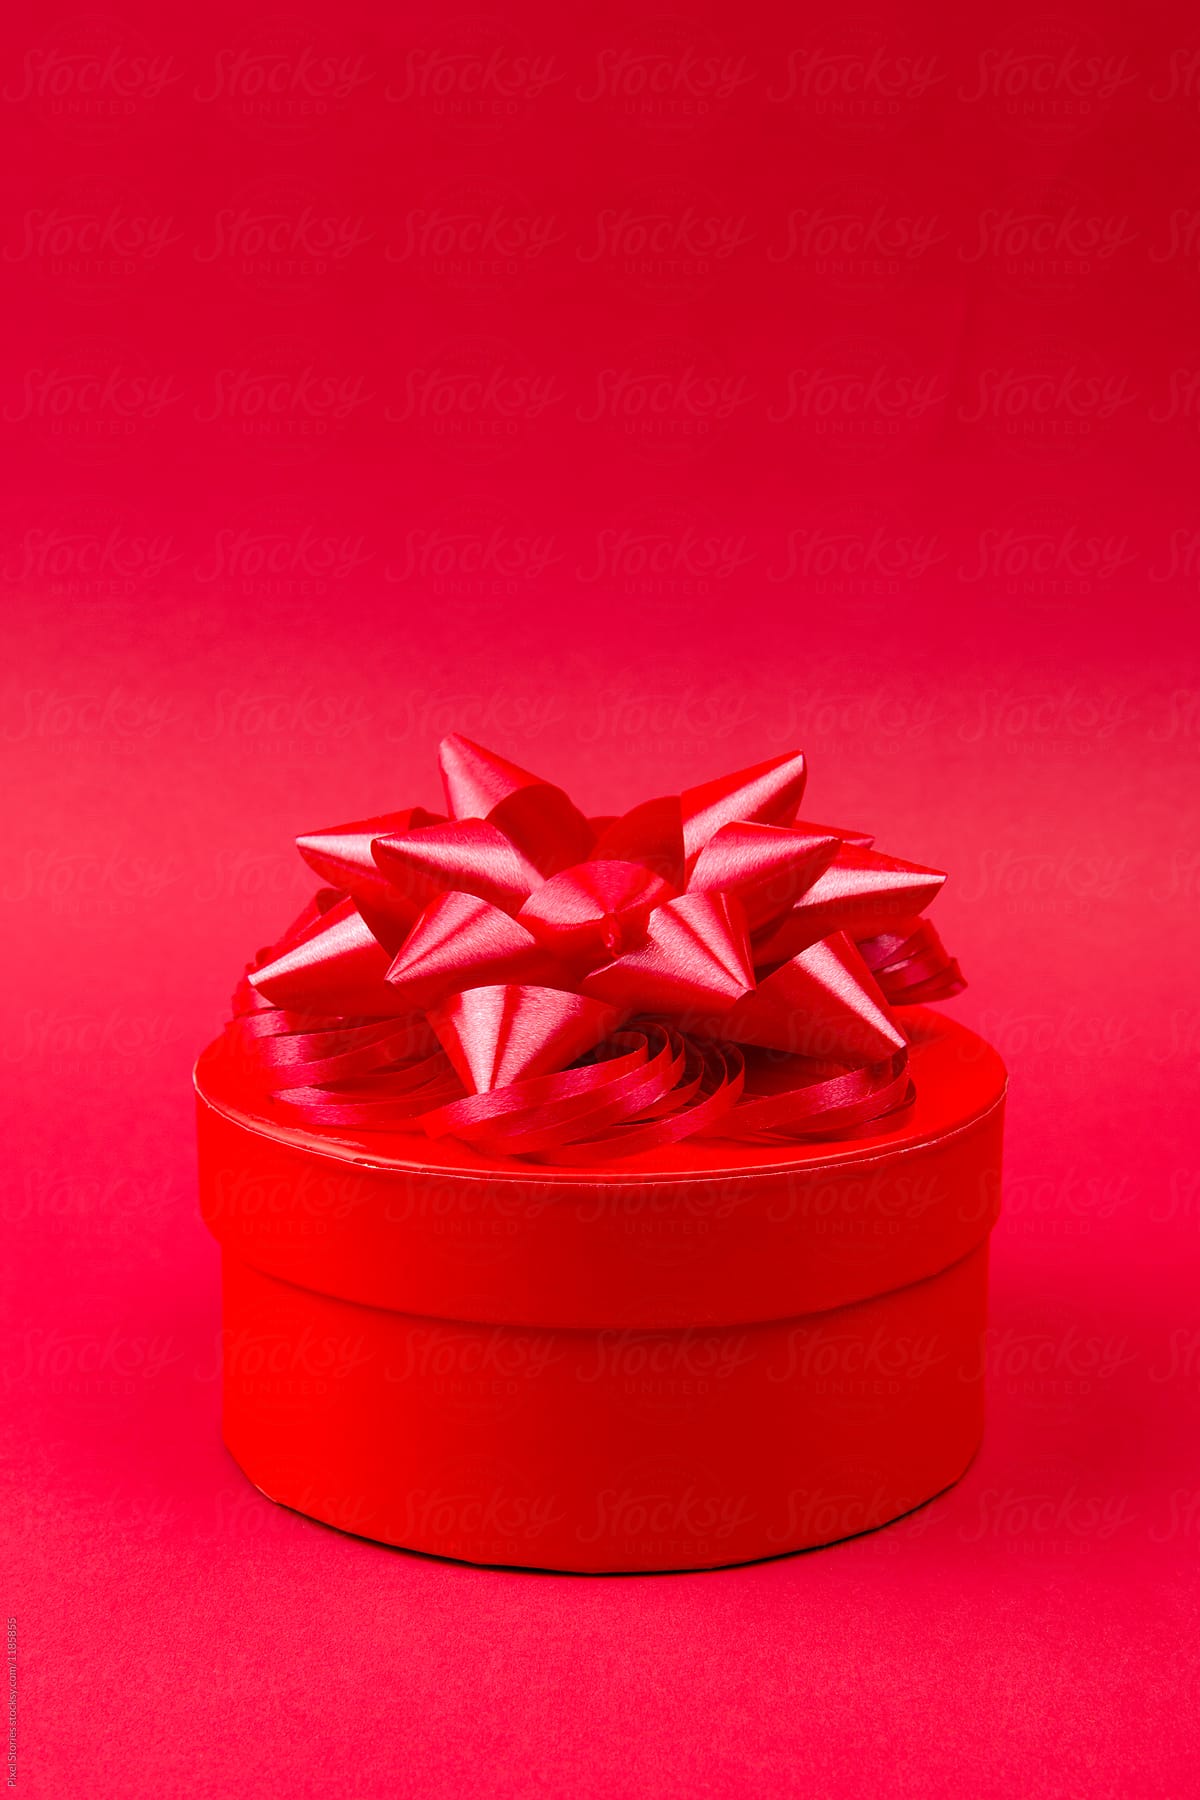 Red gift on red background